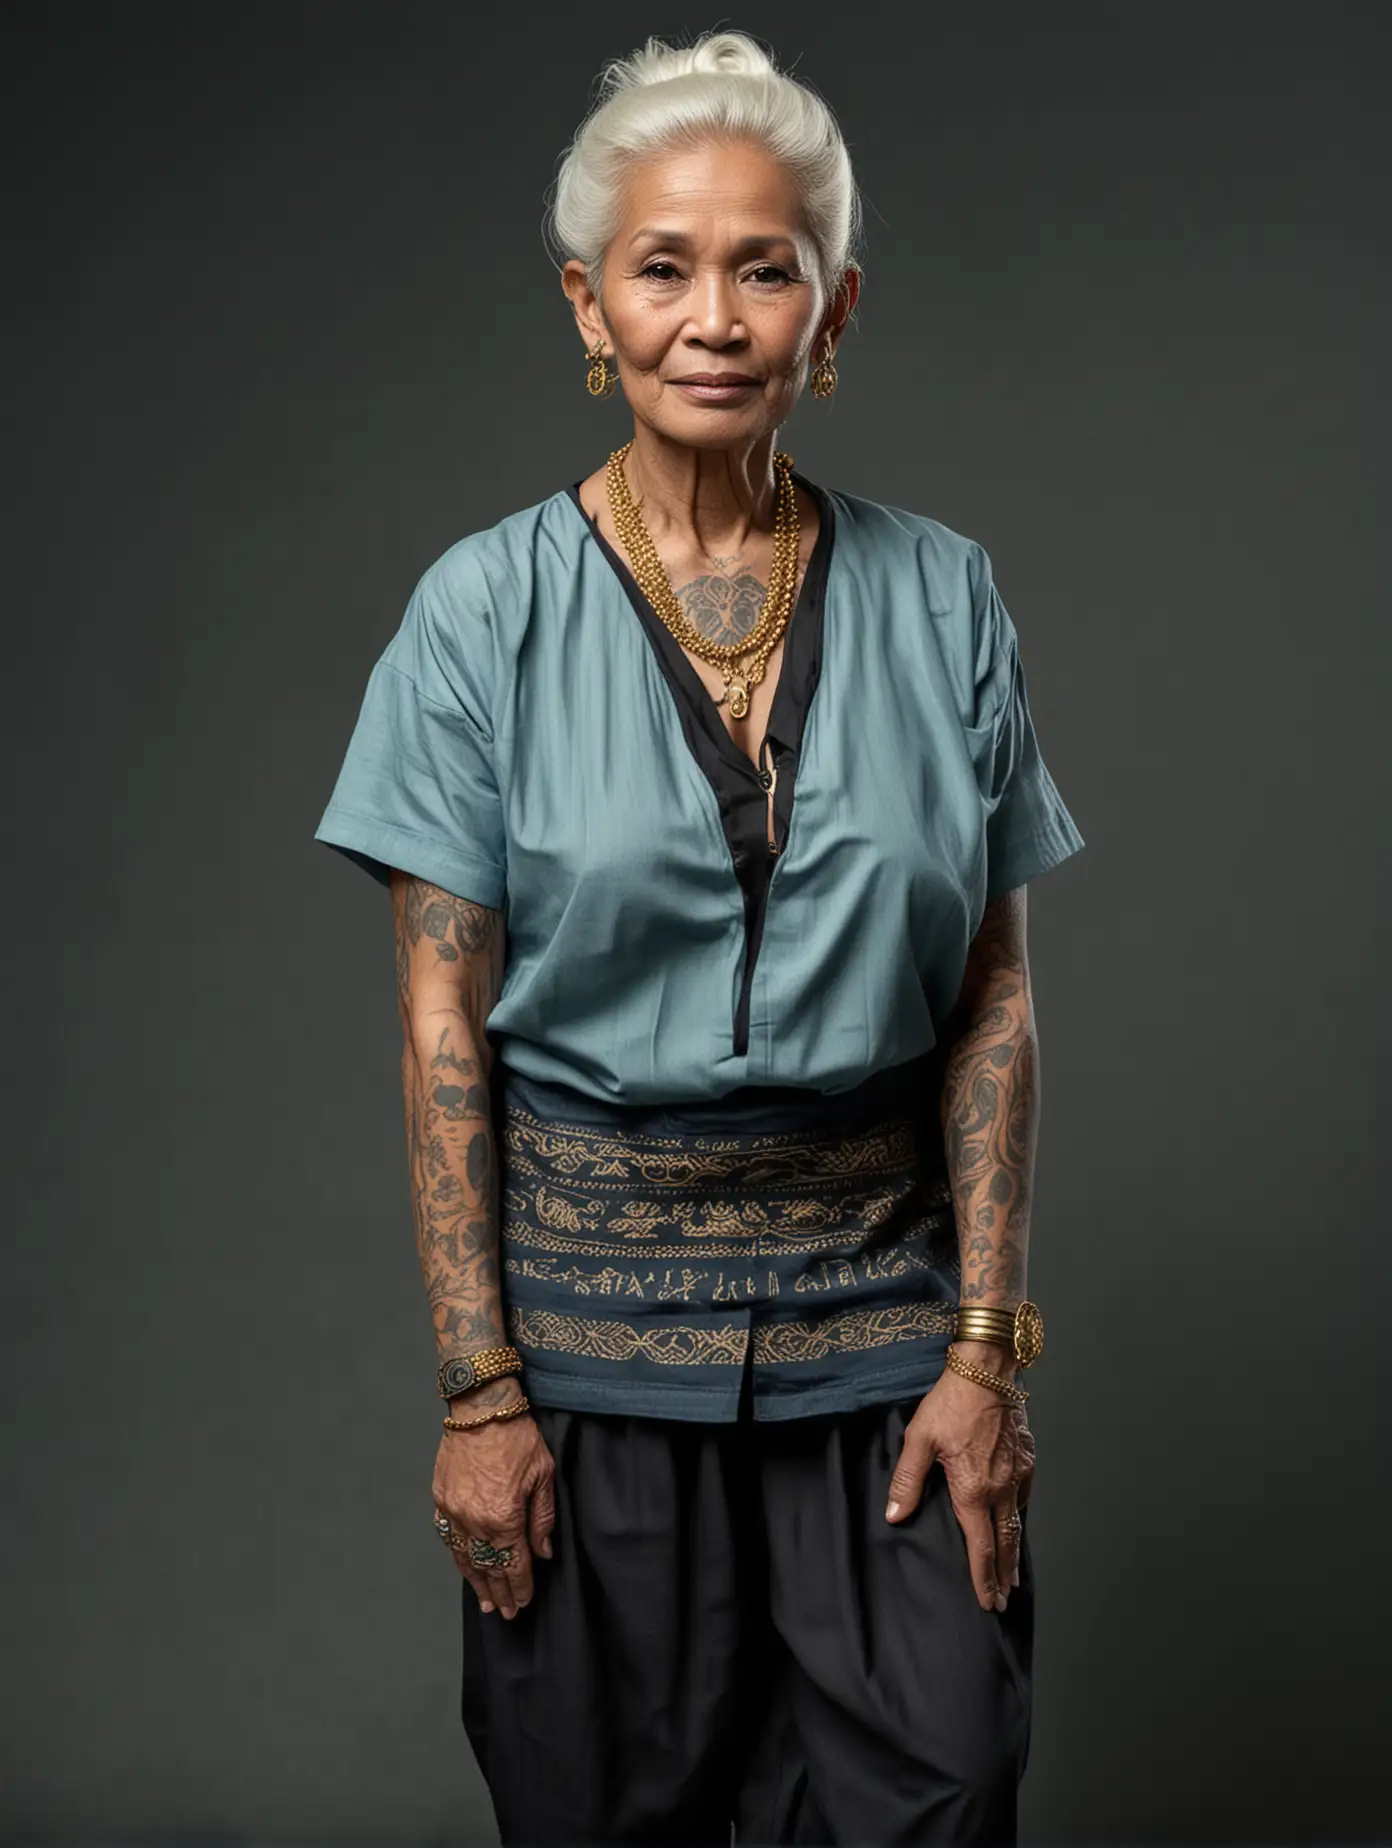 Elderly-Indonesian-Woman-with-White-Hair-and-Gold-Jewelry-Against-Black-Background